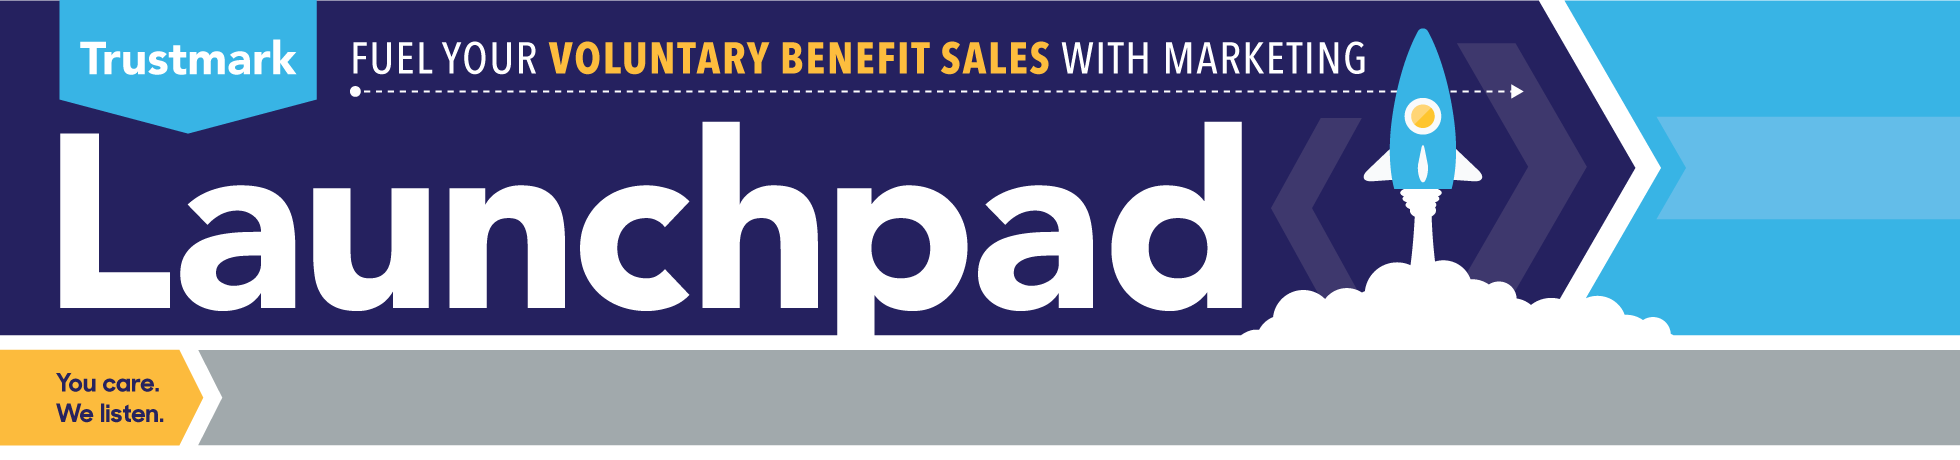 Trustmark Launchpad | Fuel Your Voluntary Benefit Sales with Marketing